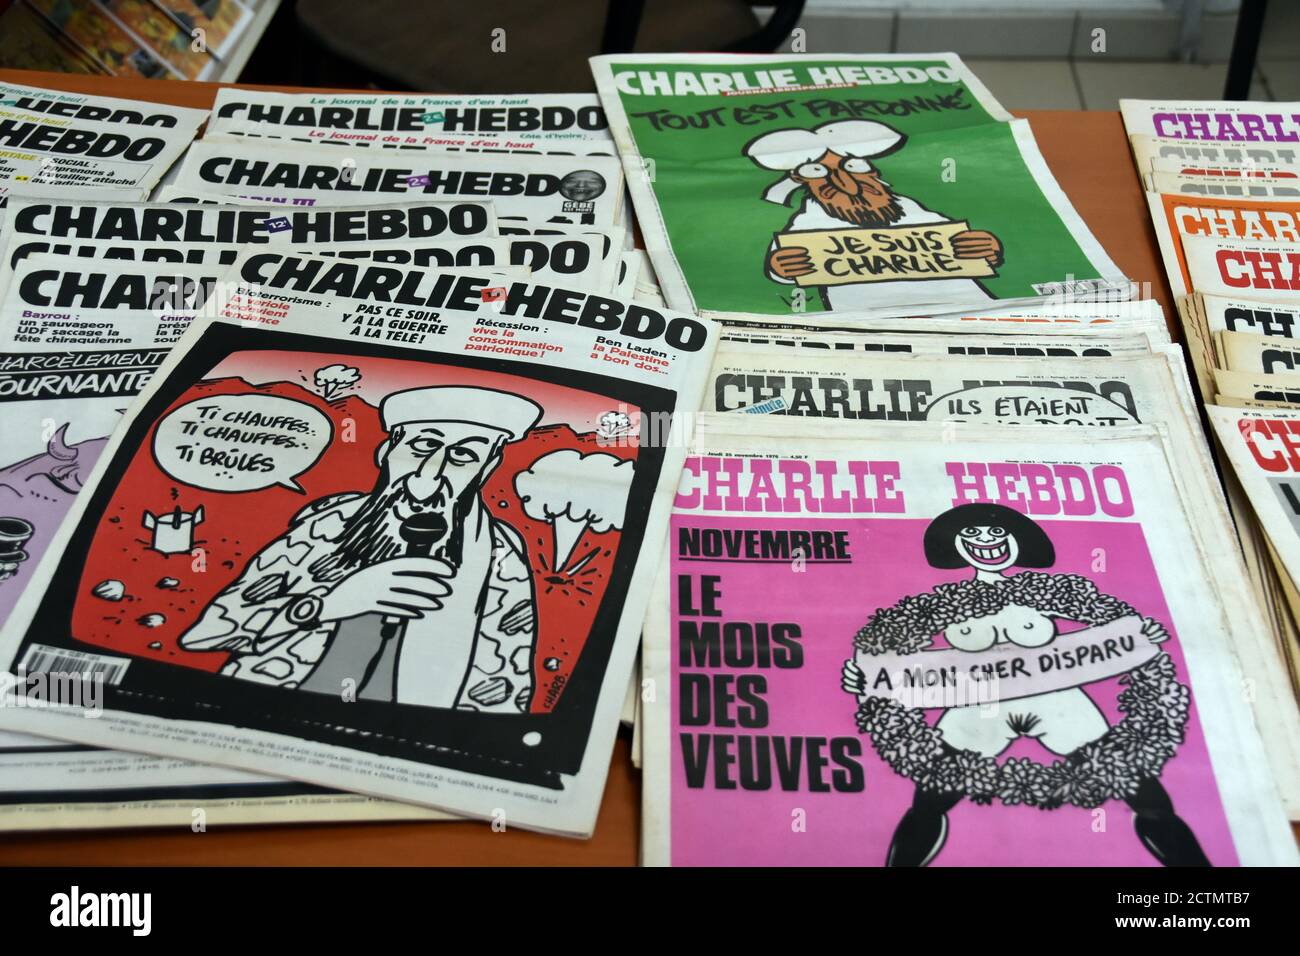 Old issues of the 'Charlie-Hebdo' newspapers are displayed on a desk.Nearly a hundred media, newspapers, magazines, television channels and radio stations, call on the French to mobilize in favor of freedom of expression, in support of Charlie Hebdo, which has been the subject of new threats since the republication of Muhammad caricatures. The ongoing trial of the attack on the newspaper, which killed 12 on January 7, 2015, will be held until November 10, 2020. Stock Photo